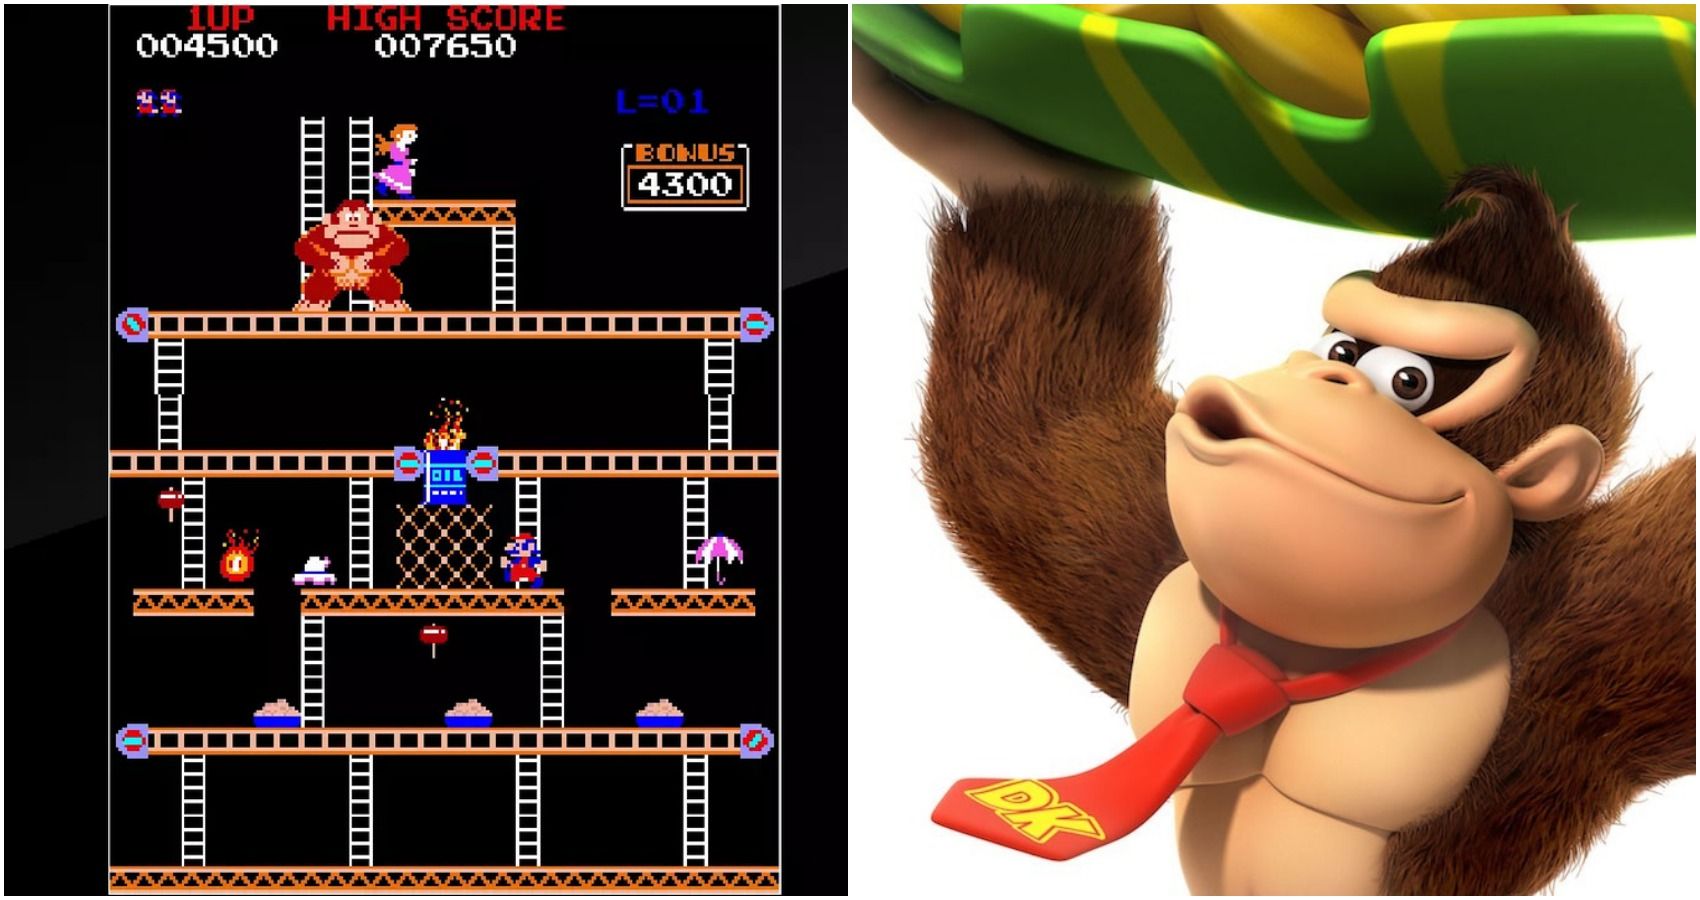 Donkey Kong: 10 Mind-Blowing Facts You Didn't Know About The Arcade Classic